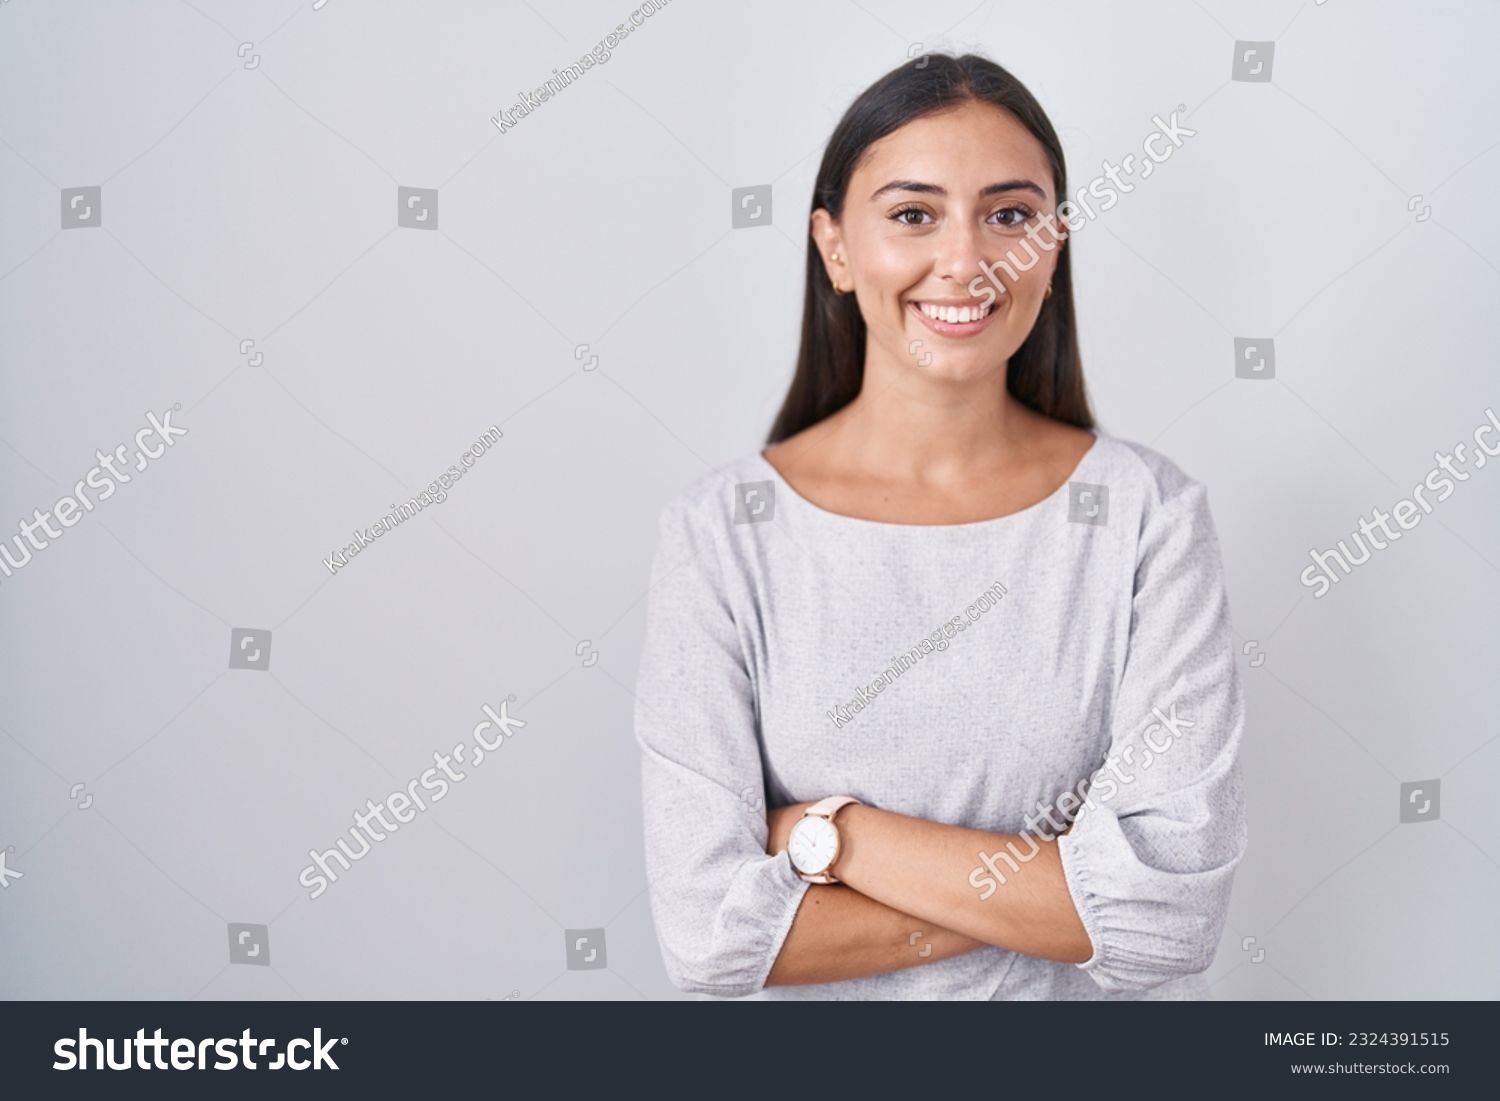 Young hispanic woman standing over white background happy face smiling with crossed arms looking at the camera. positive person.  #2324391515